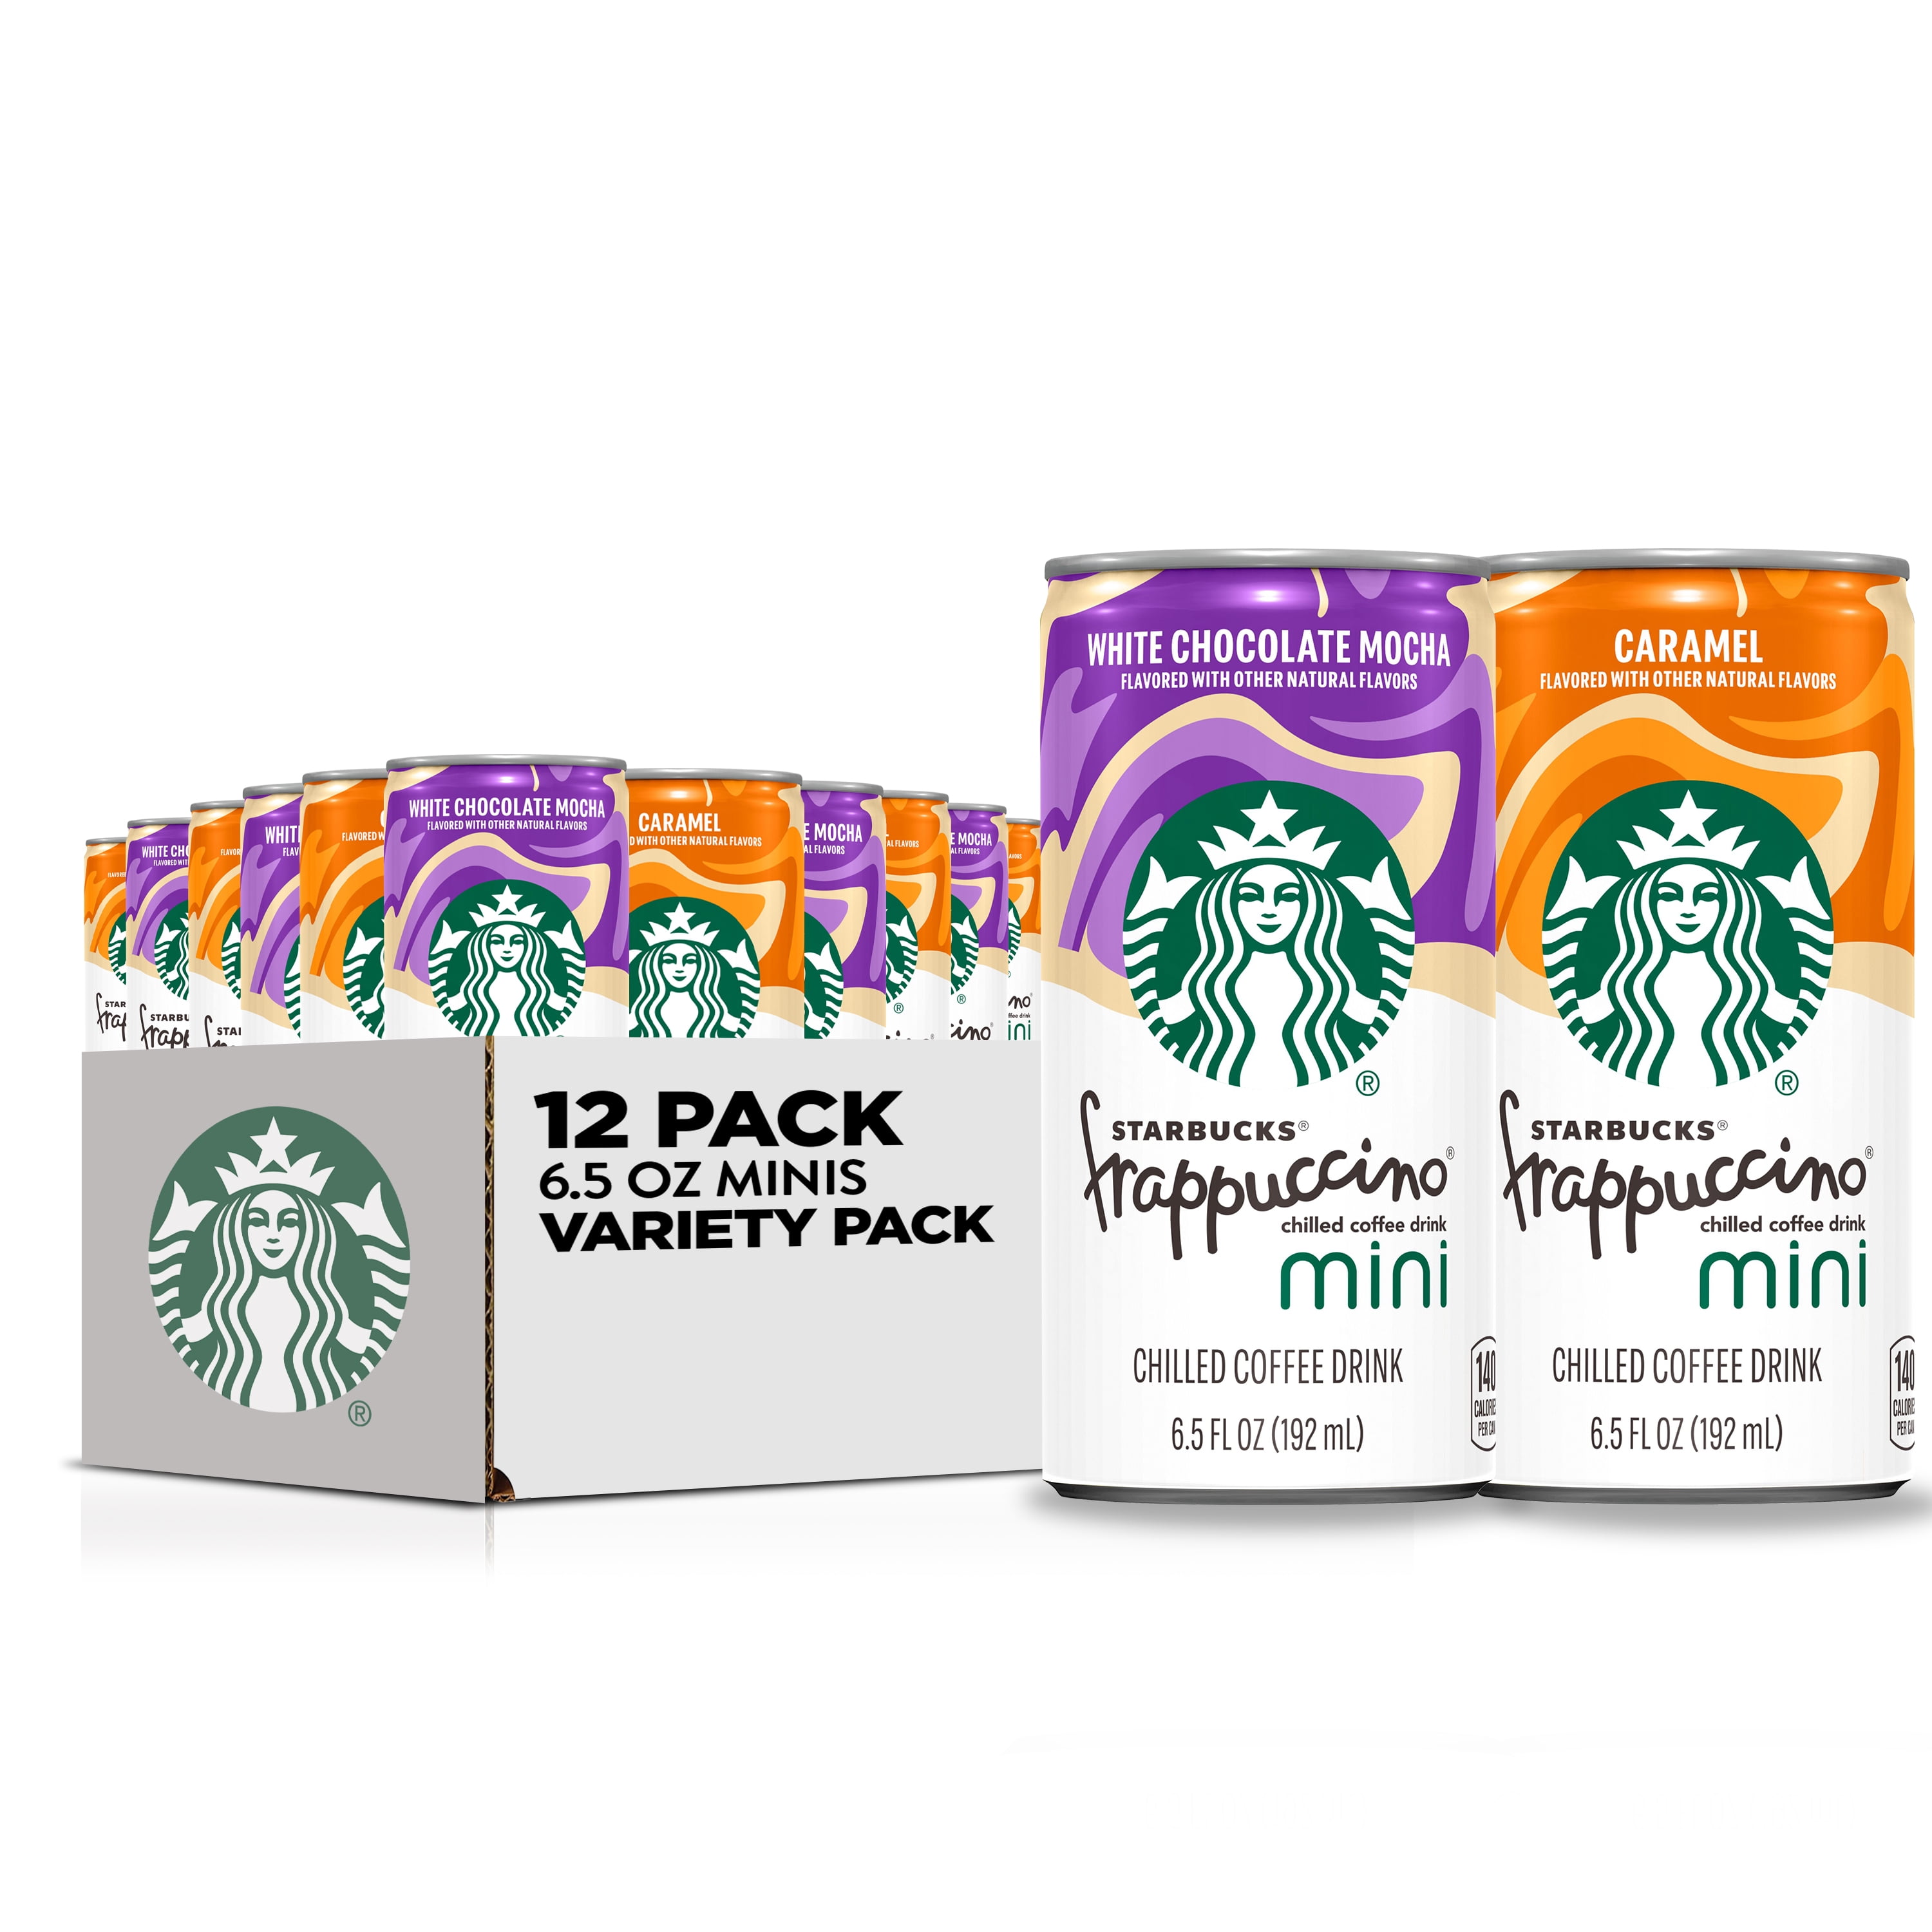 Starbucks Frappuccino, 2 Flavor Variety Pack, 9.5 Fl Oz (15 Count)